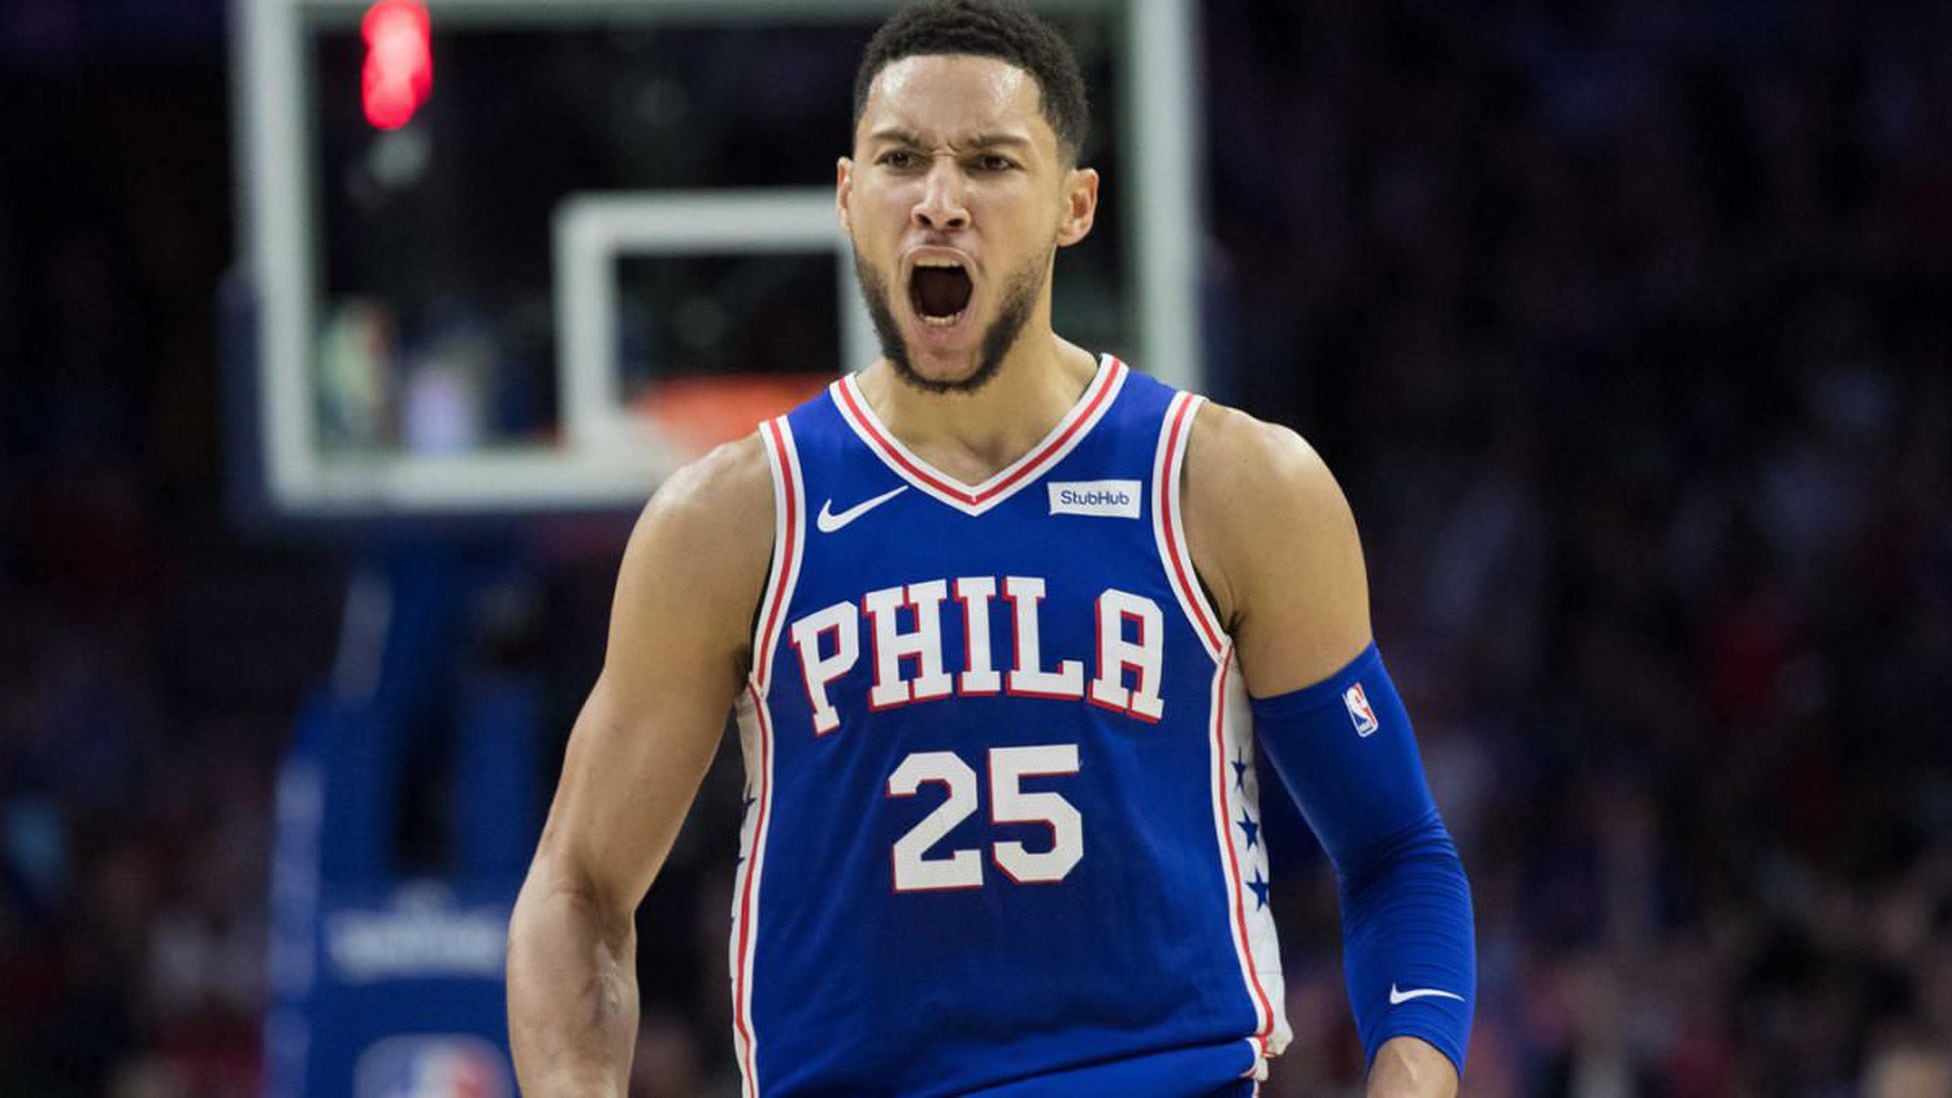 Decir la verdad anfitriona sangre Ben Simmons and the Philadelphia 76ers in stalemate - AS USA